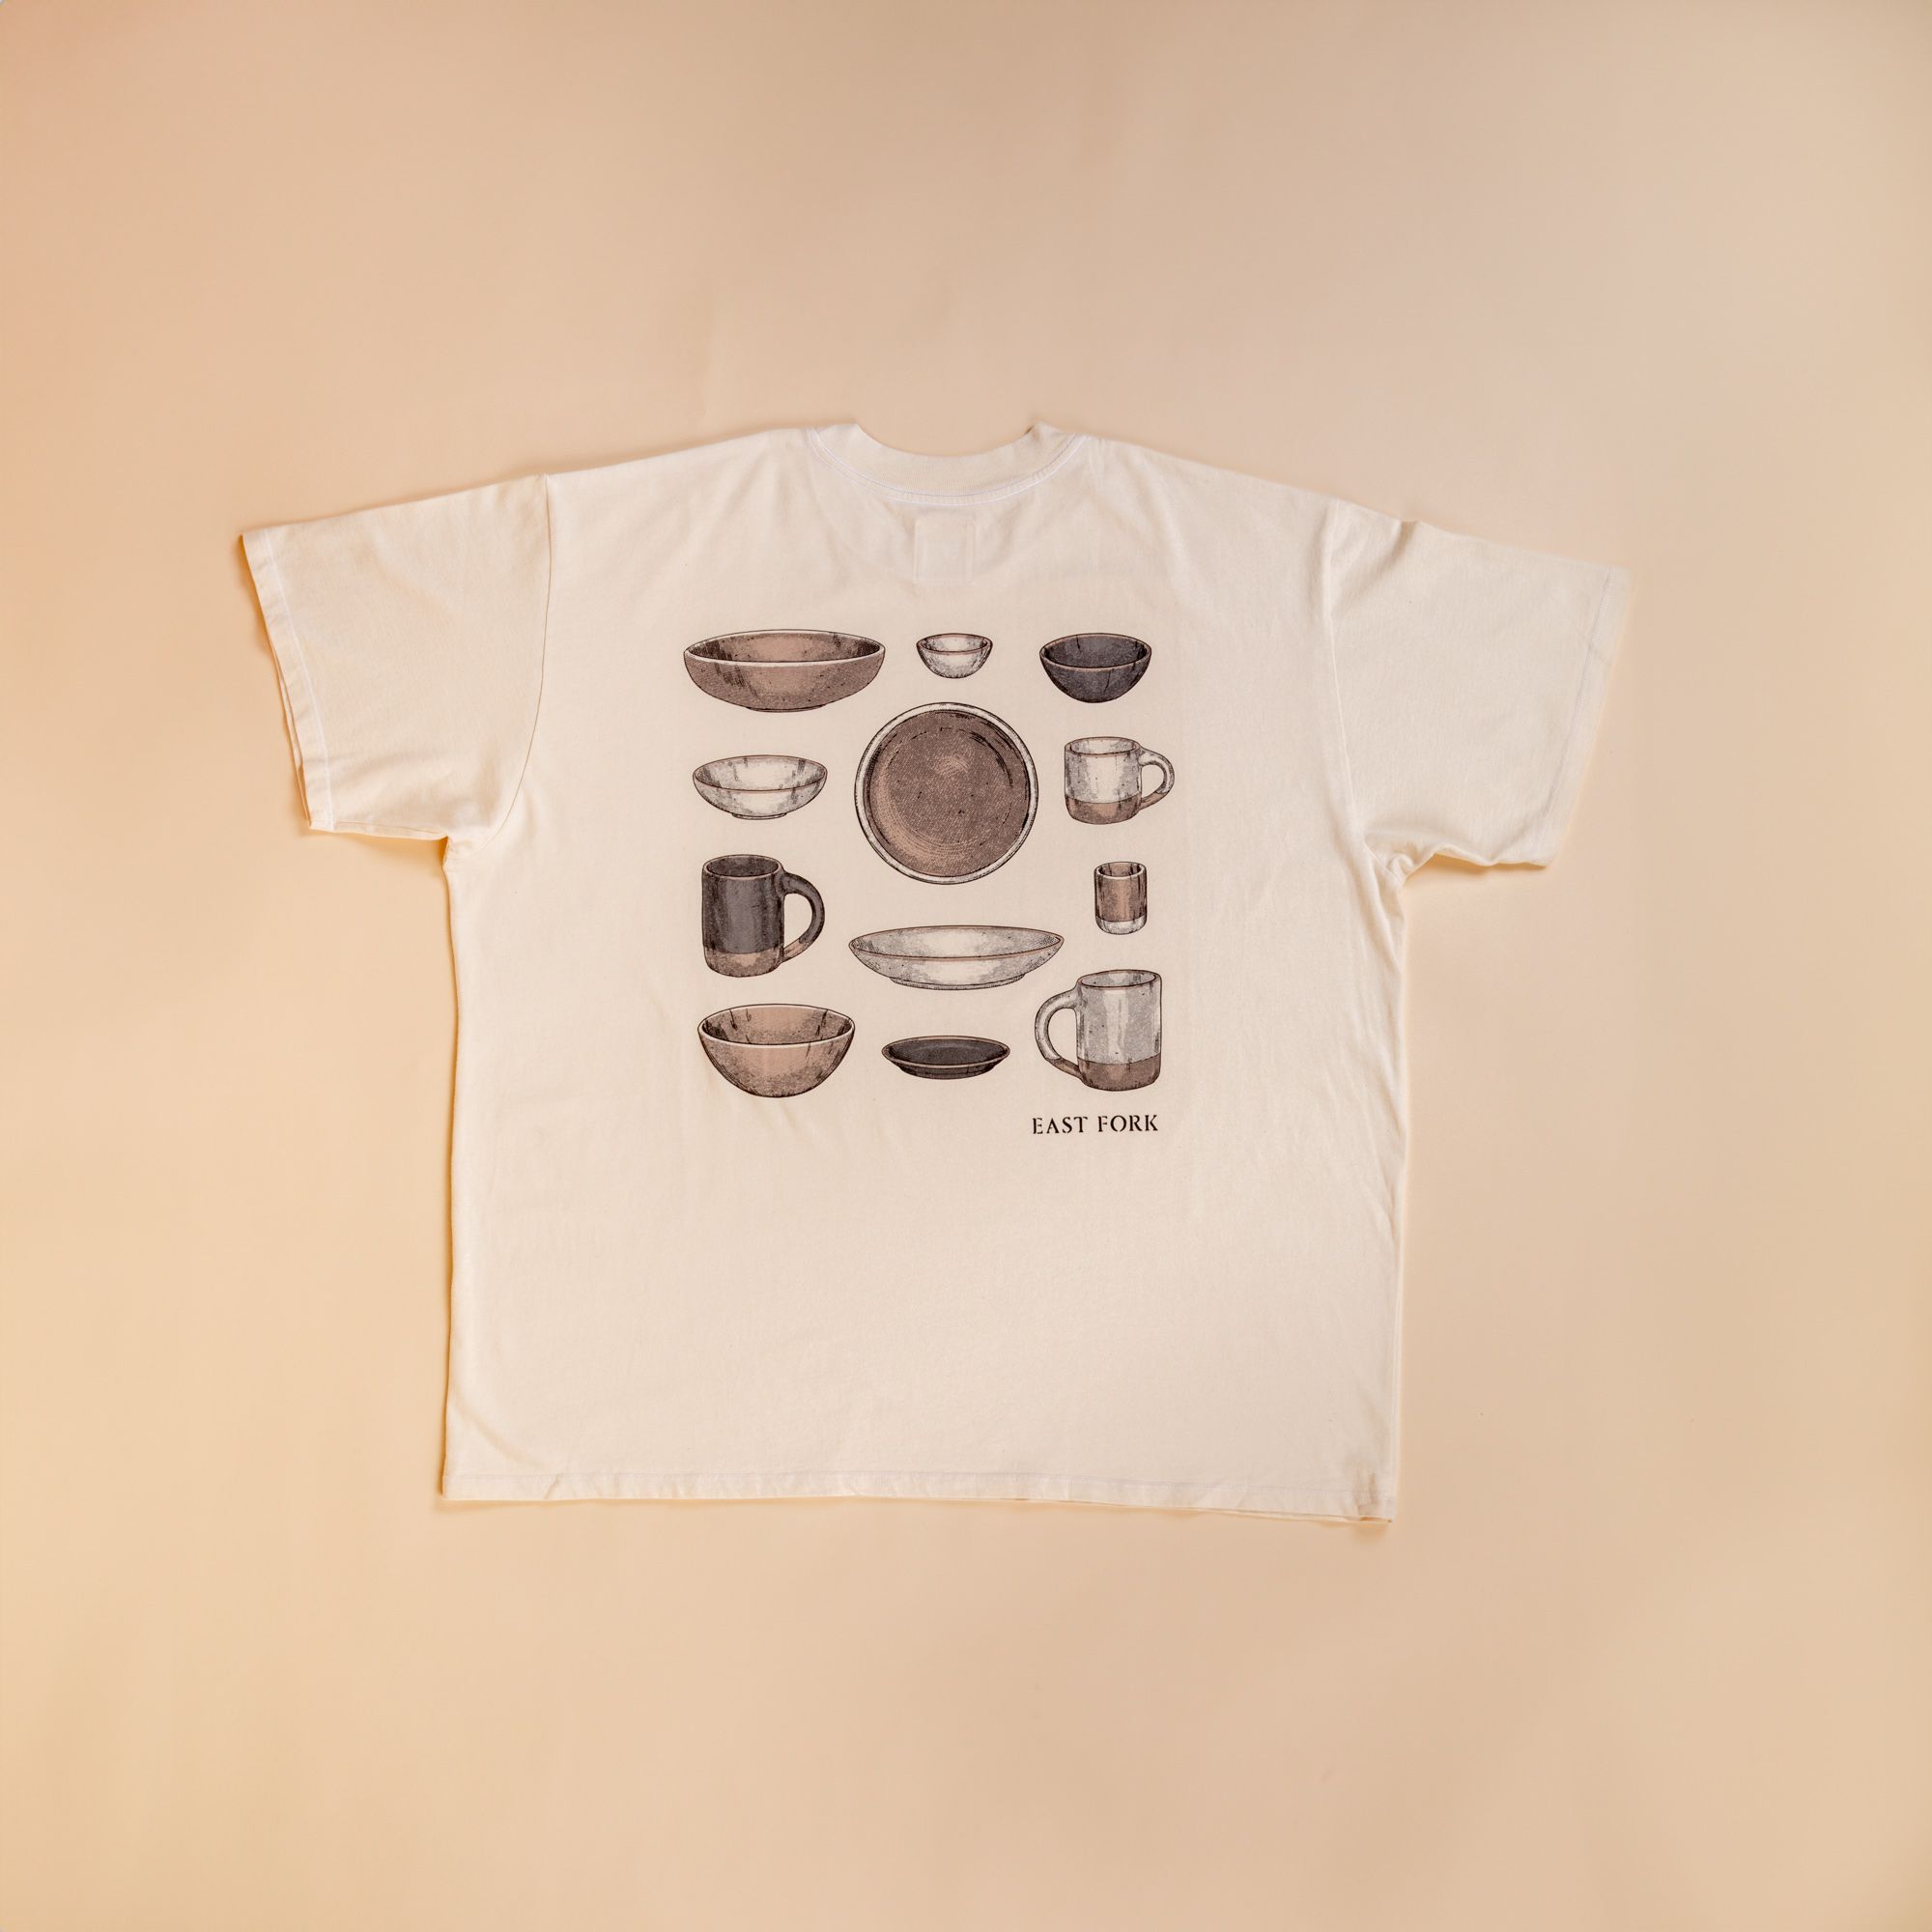 Flat lay of the back of a t-shirt in cream against a cream background. The back has an illustration of various mugs, plates, and bowls all in neutral colors.